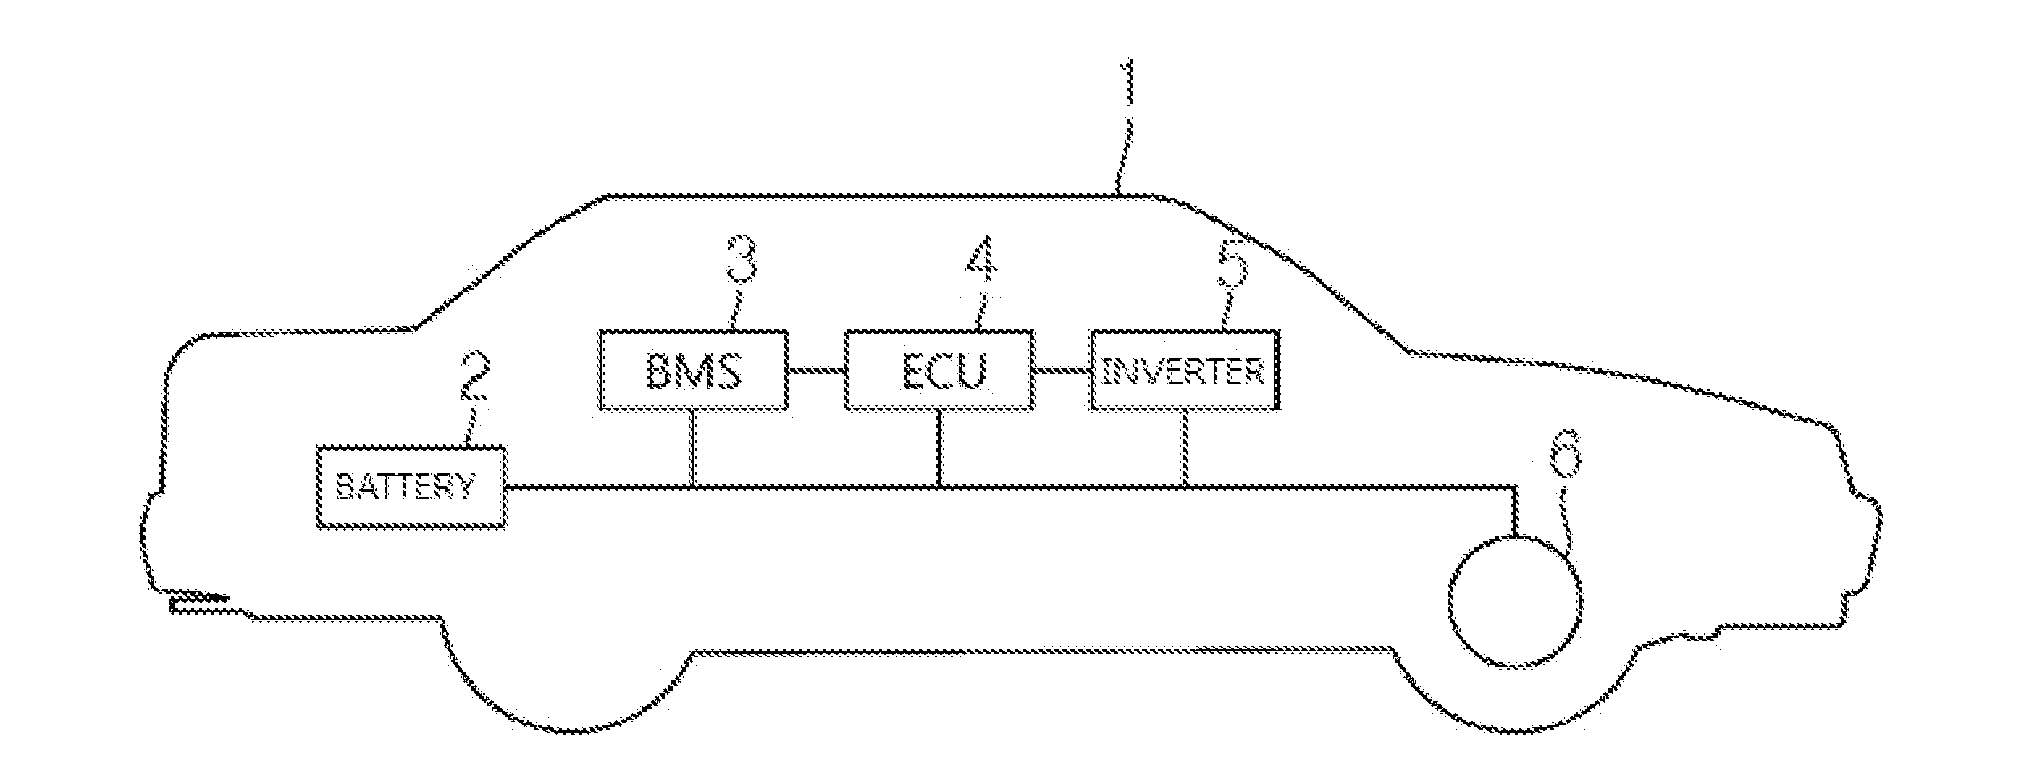 Battery control device for standardization of battery